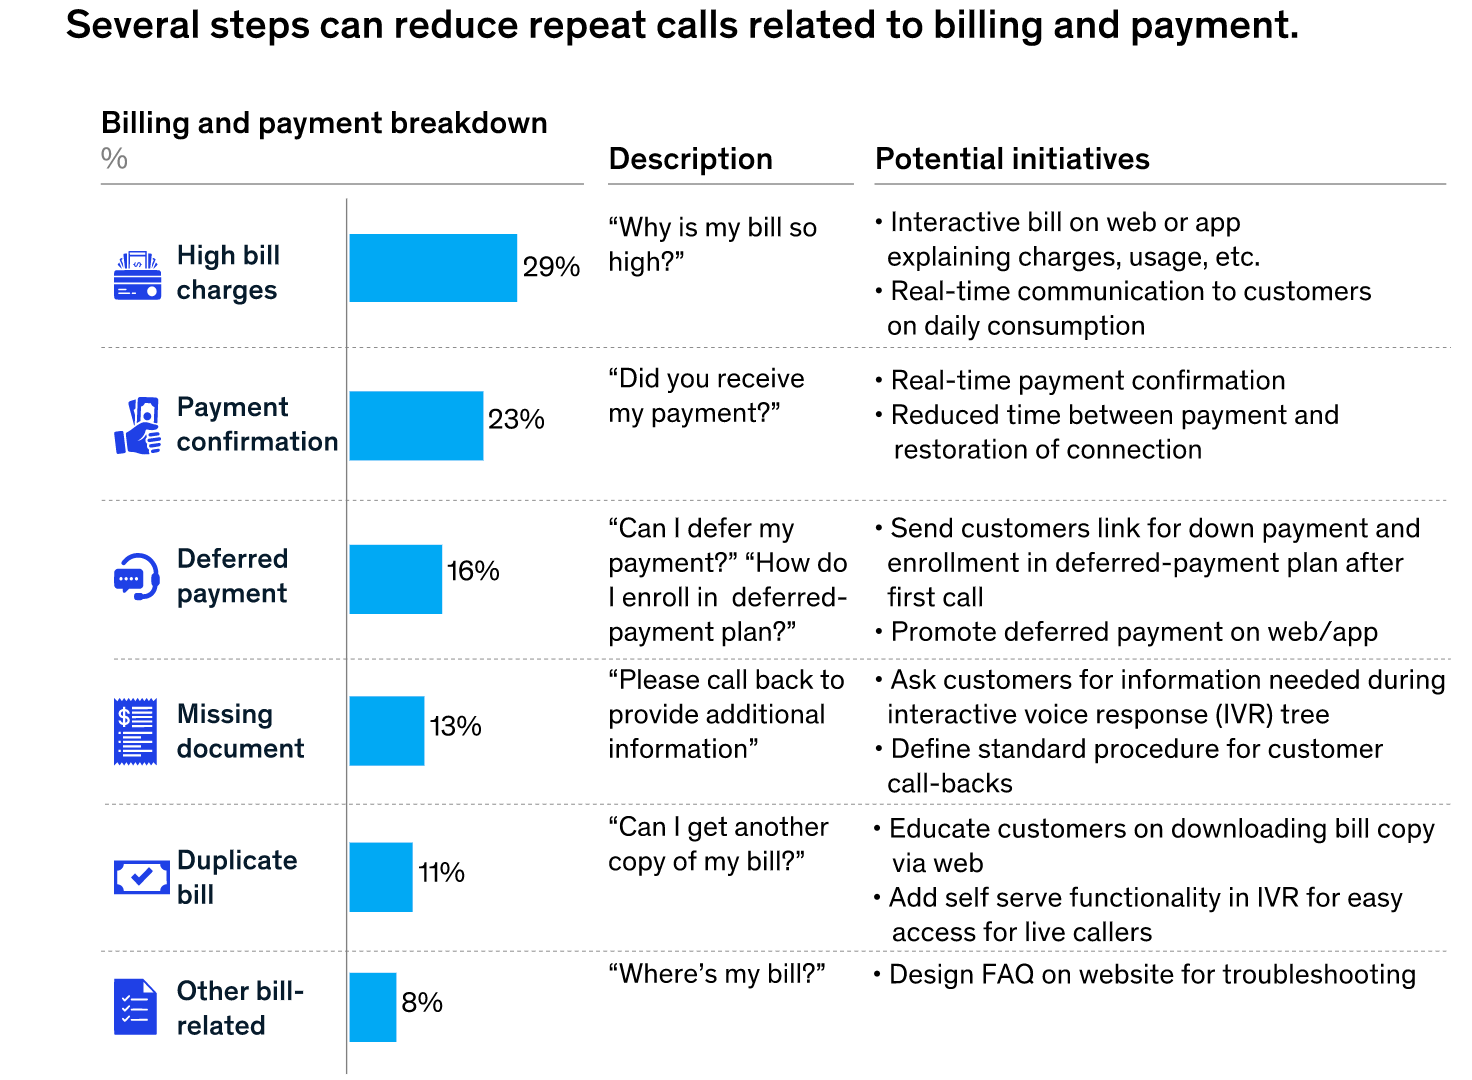 McKinsey report showing that billing-related questions are often reasons that customers call multiple times 